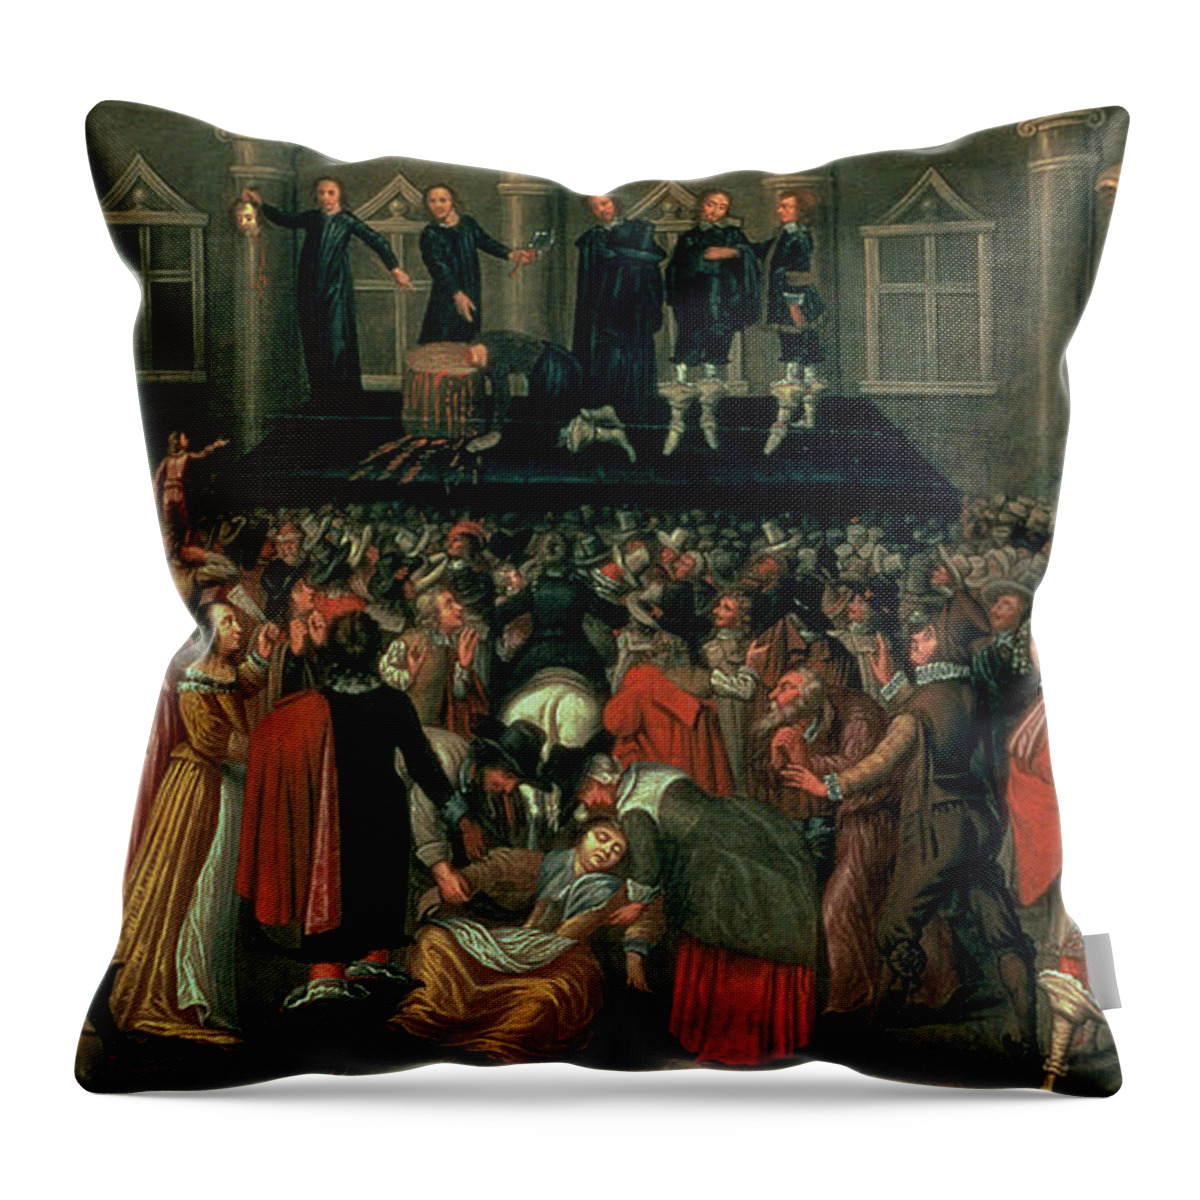 Eyewitness Throw Pillow featuring the painting An Eyewitness Representation of the Execution of King Charles I by John Weesop